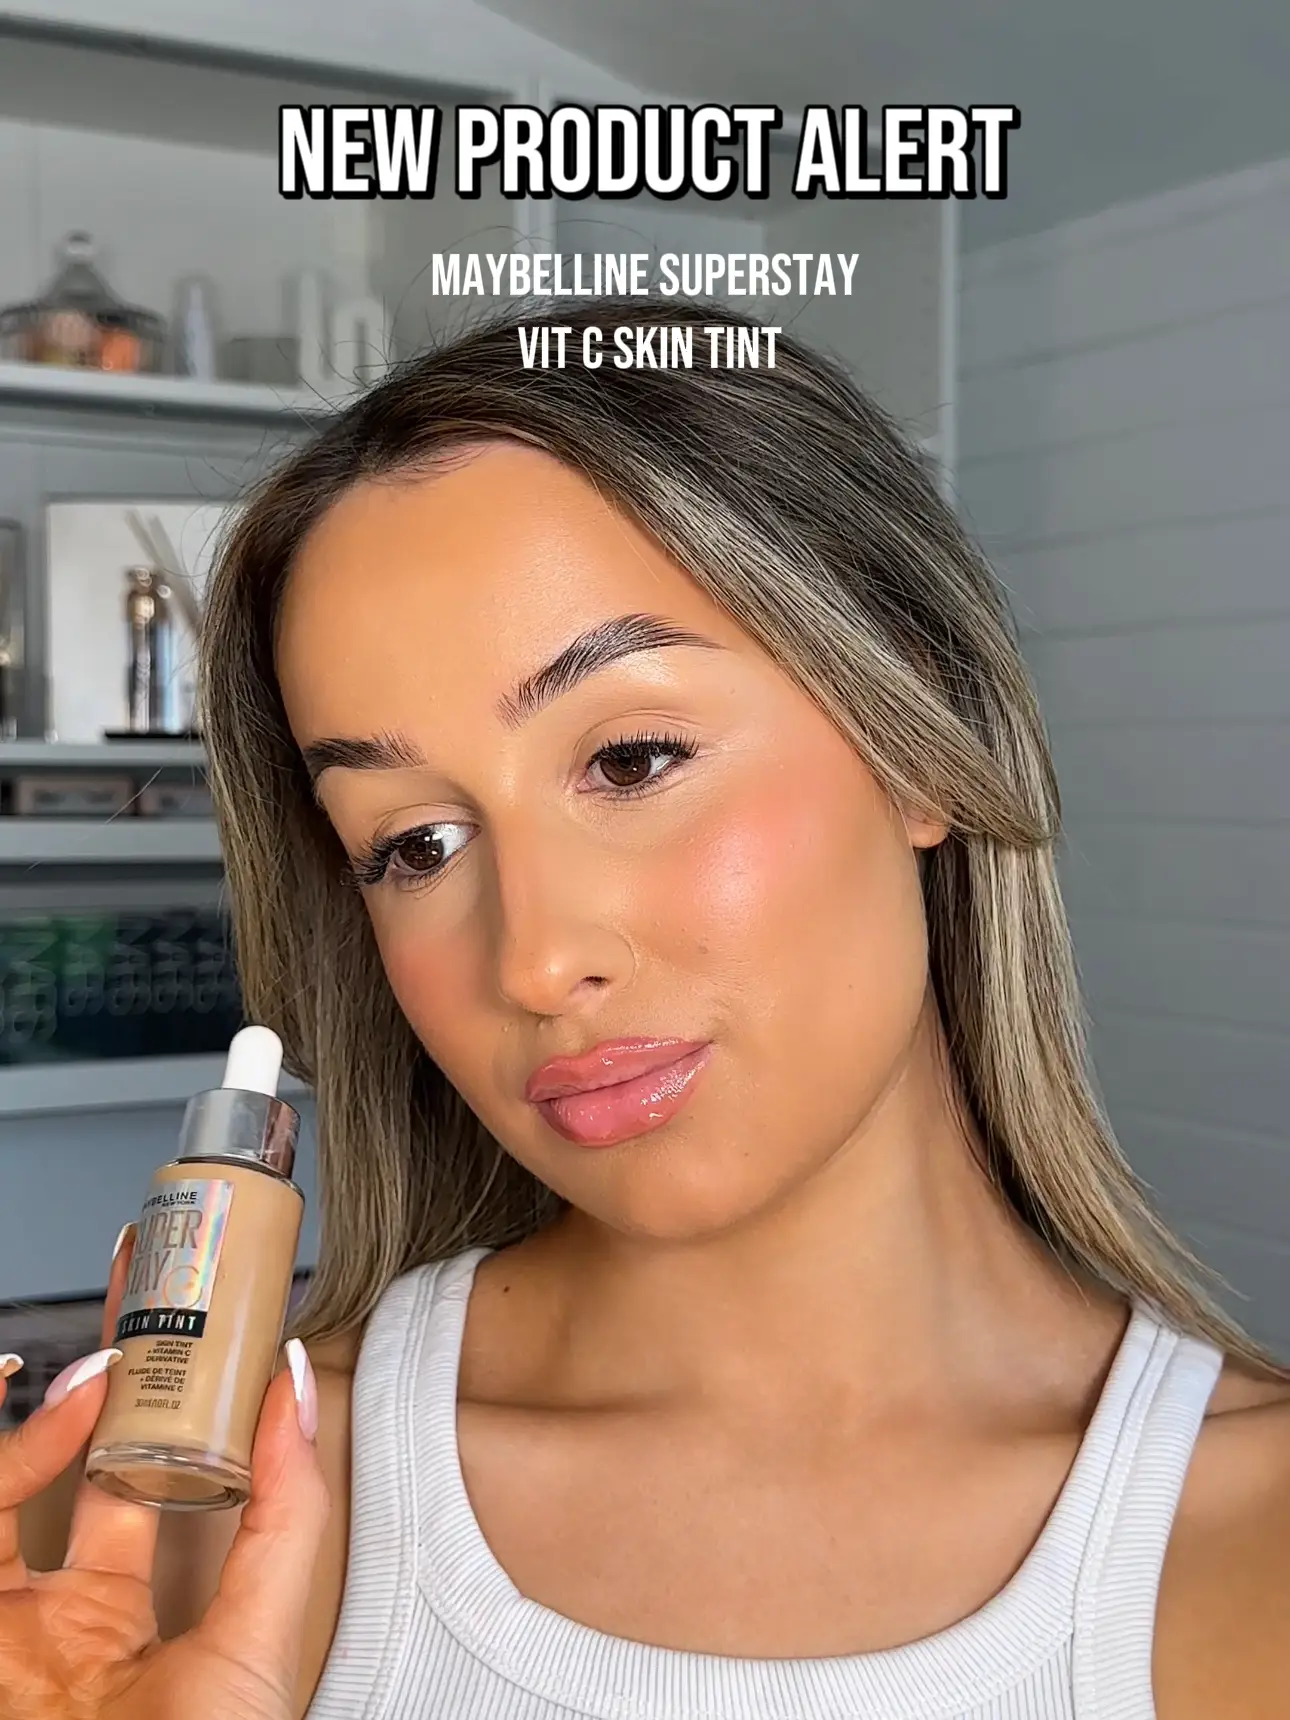 Maybelline Super Stay Skin Tint review 🤷🏻‍♀️, Gallery posted by  Saskiafield